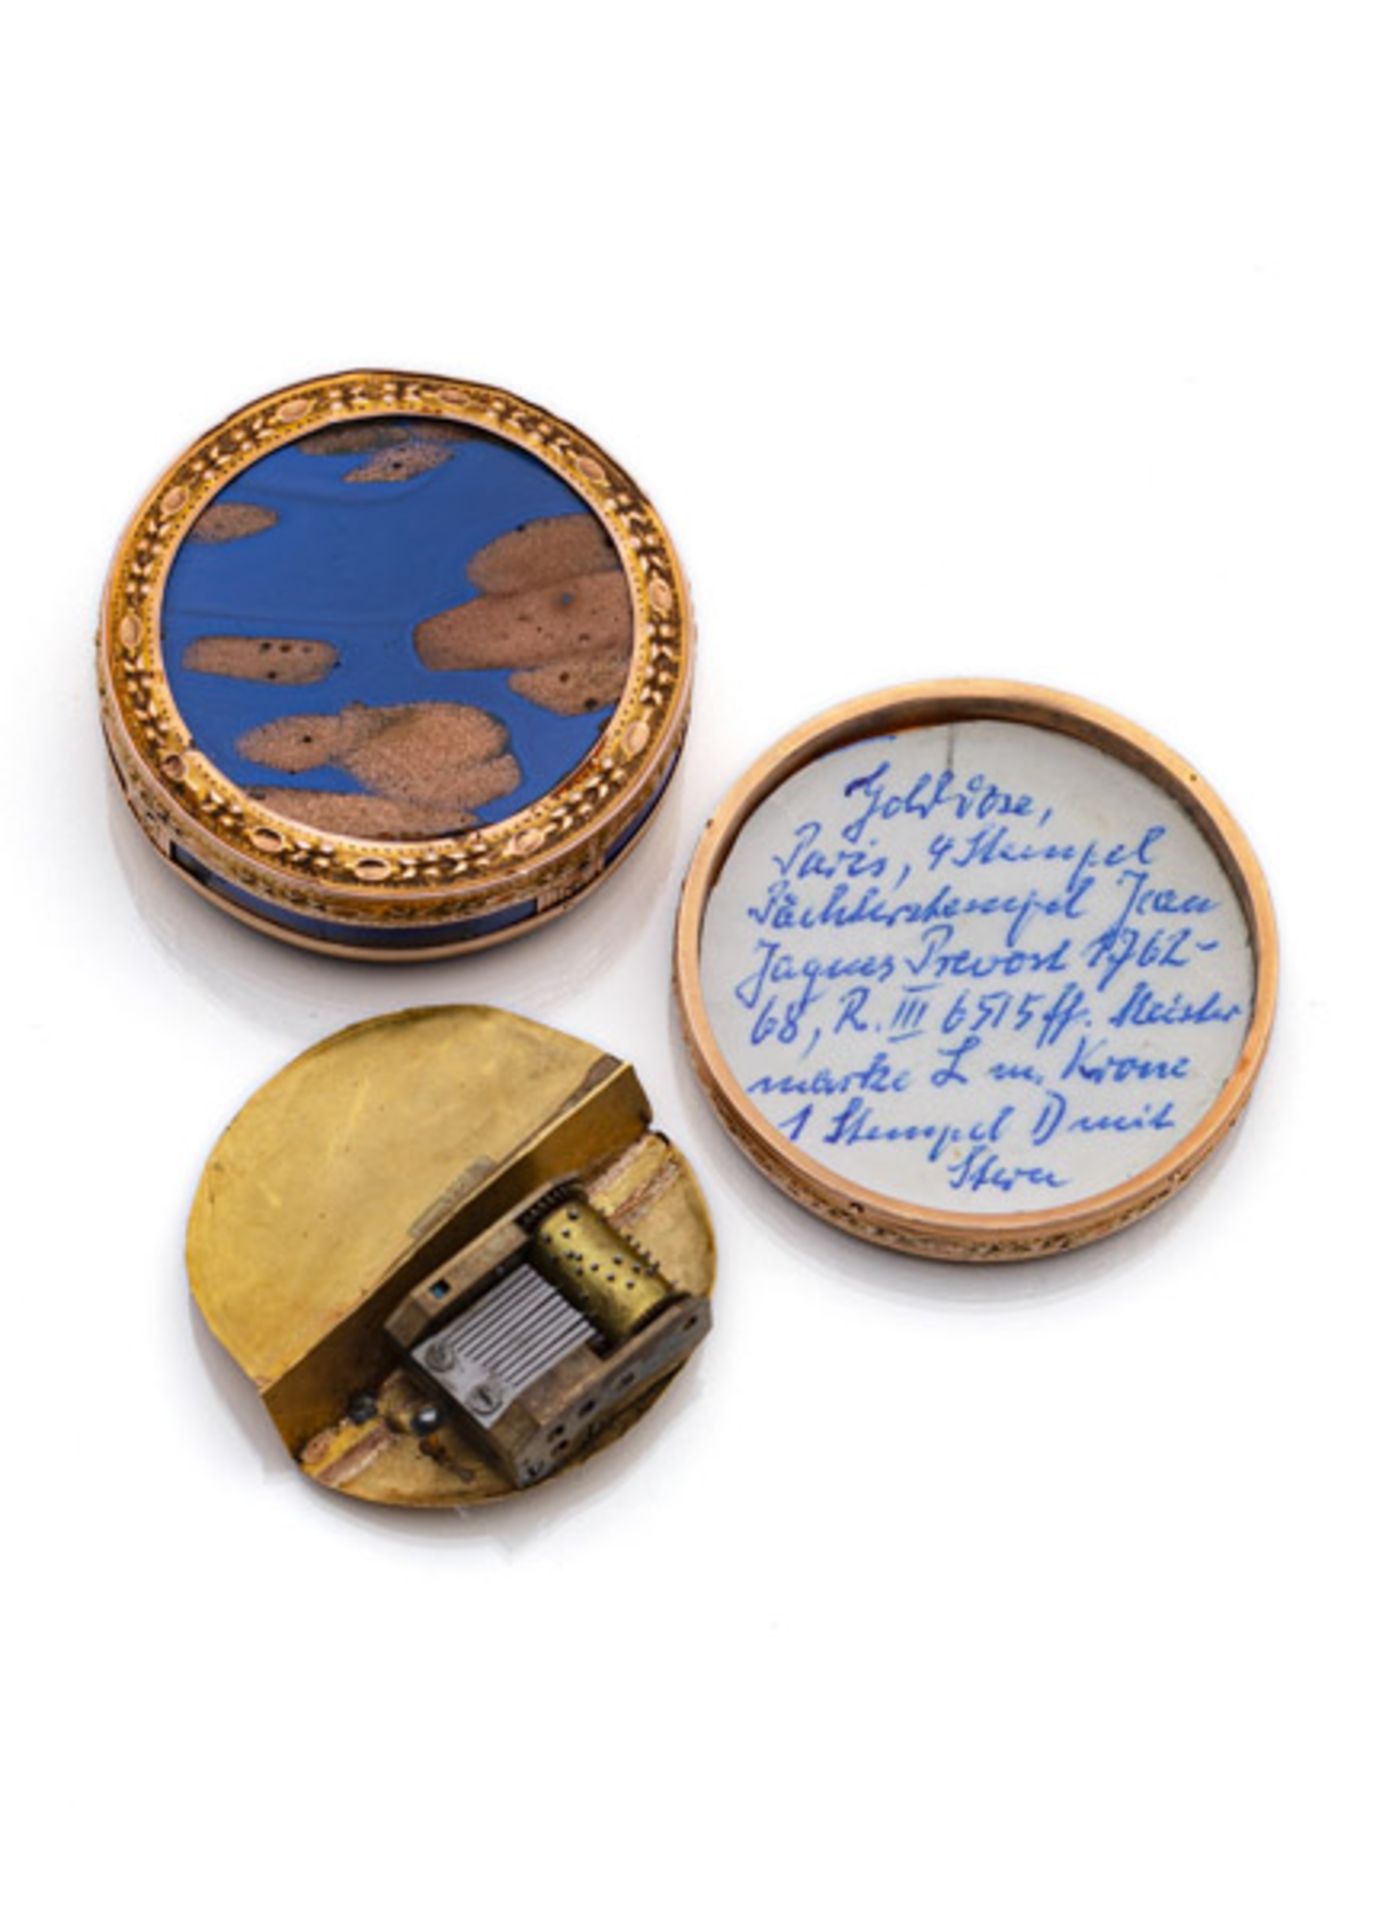 A FRENCH GOLD TABATIERE WITH A MINIATURE CYLINDER MUSICAL MECHANISM - Image 2 of 3